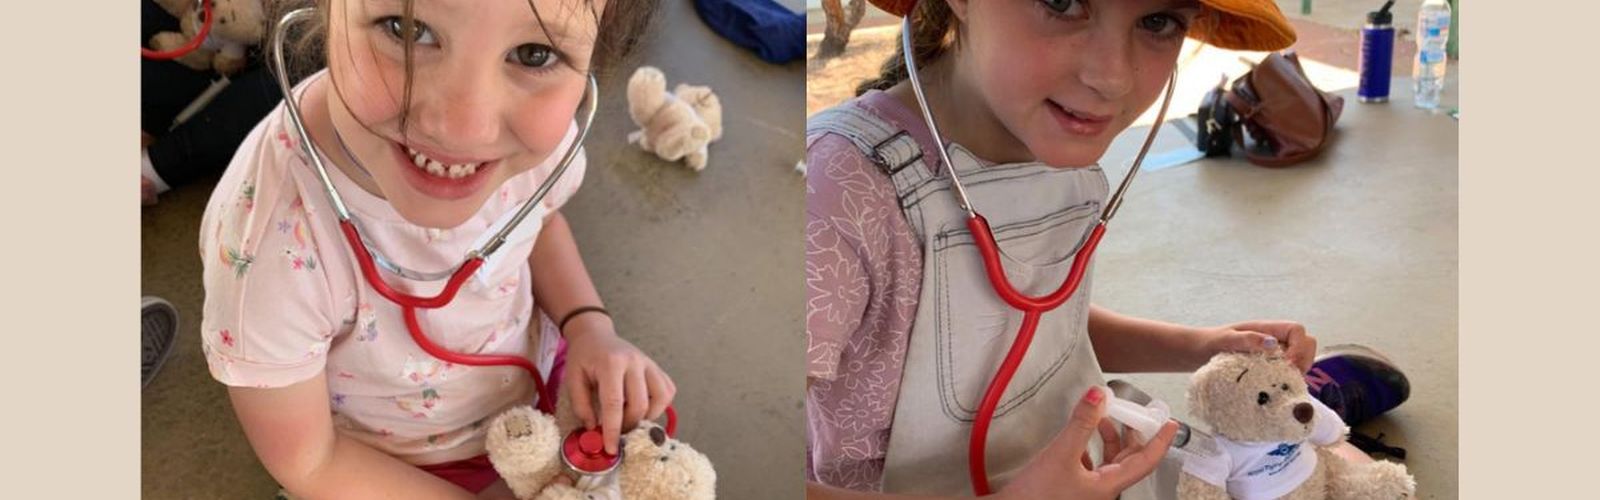 Two children are pictured holding an RFDS teddy bear, learning about wellbeing strategies.